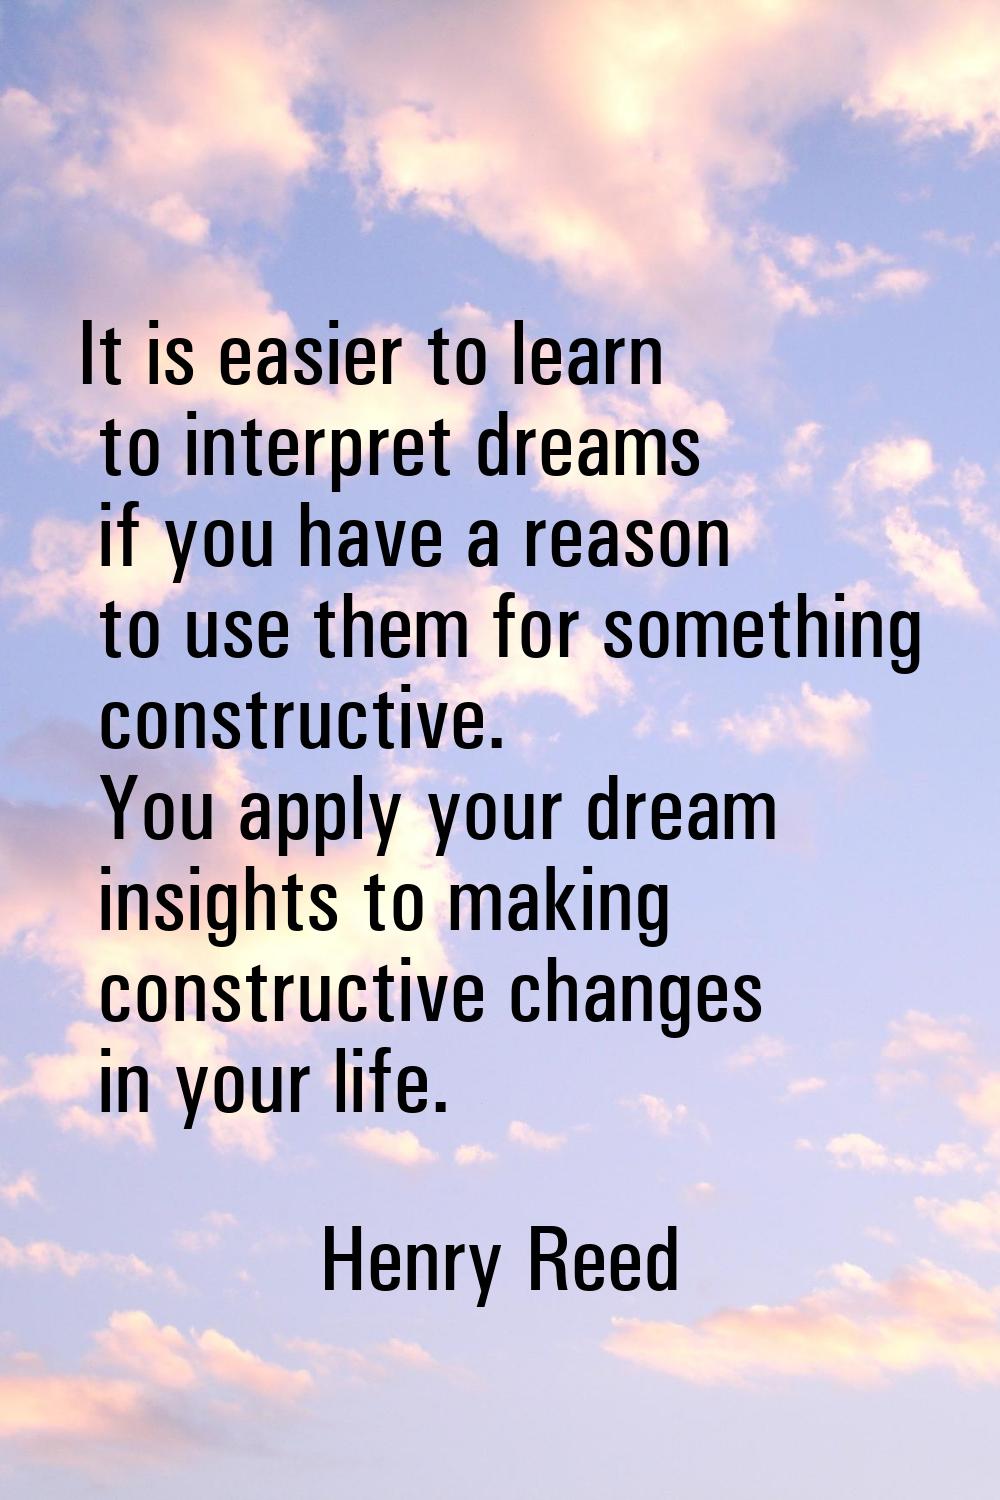 It is easier to learn to interpret dreams if you have a reason to use them for something constructi